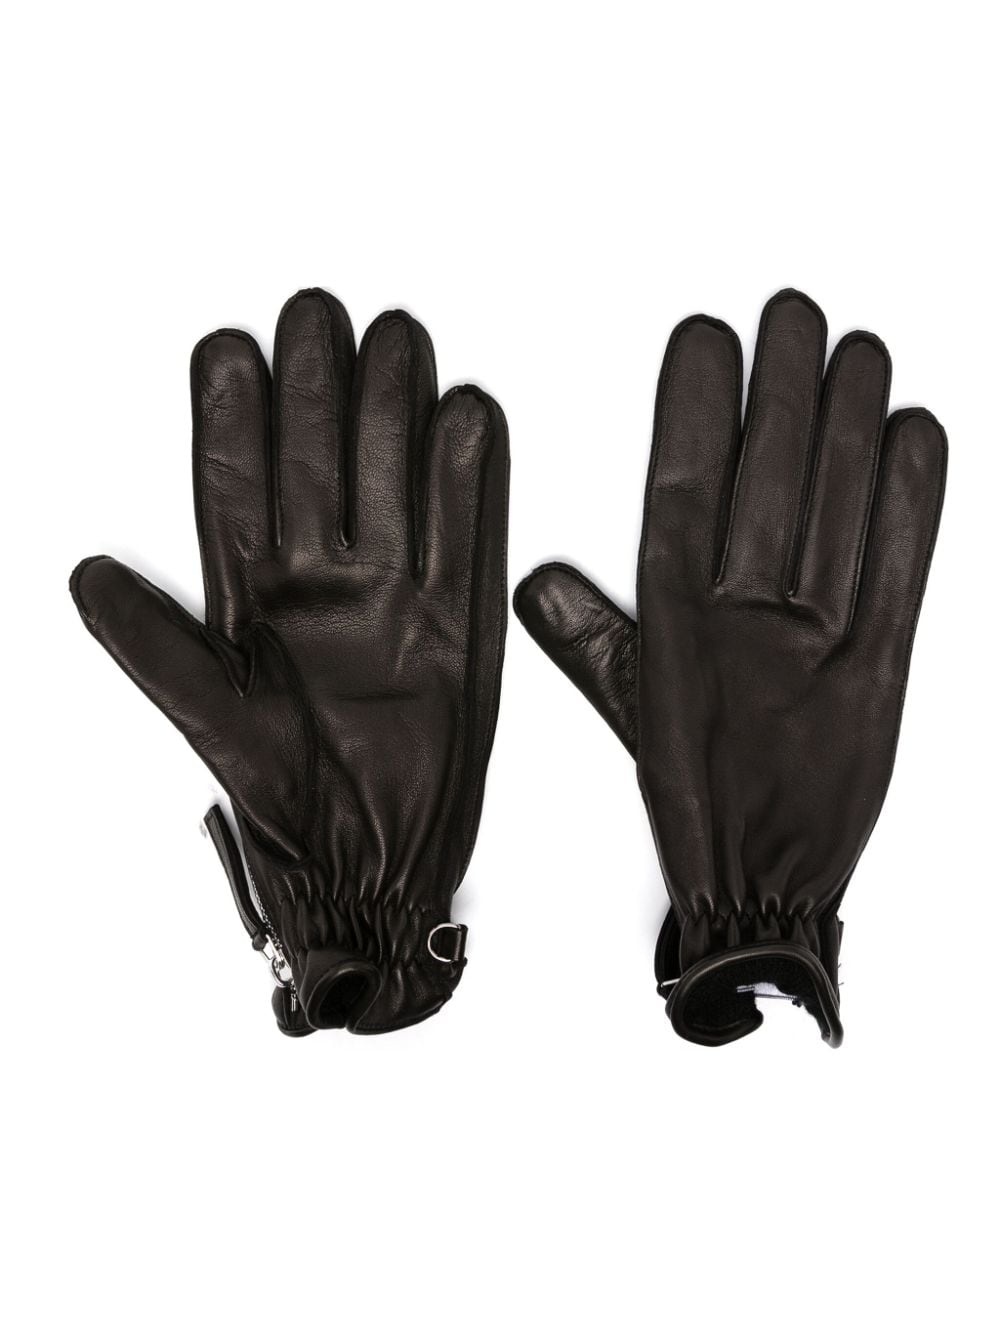 logo-patch leather gloves - 1